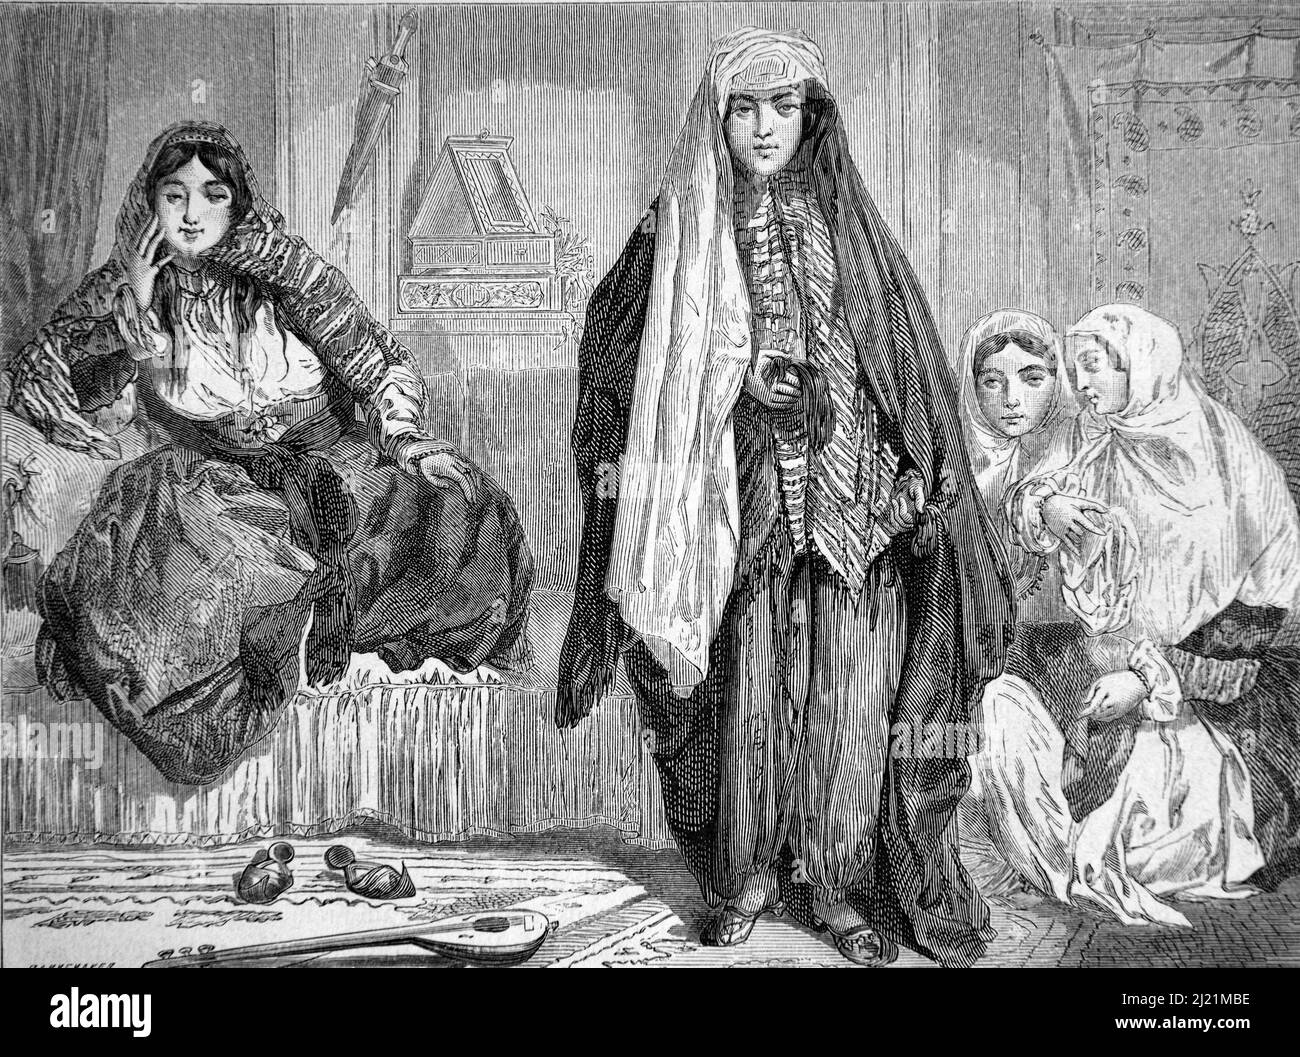 Persian Women or Iranian Women Wearing Traditional Iranian Clothes or Ethnic Costume in Tradition Persian or Iranian House Interior Iran. Vintage Illustration or Engraving 1860. Stock Photo